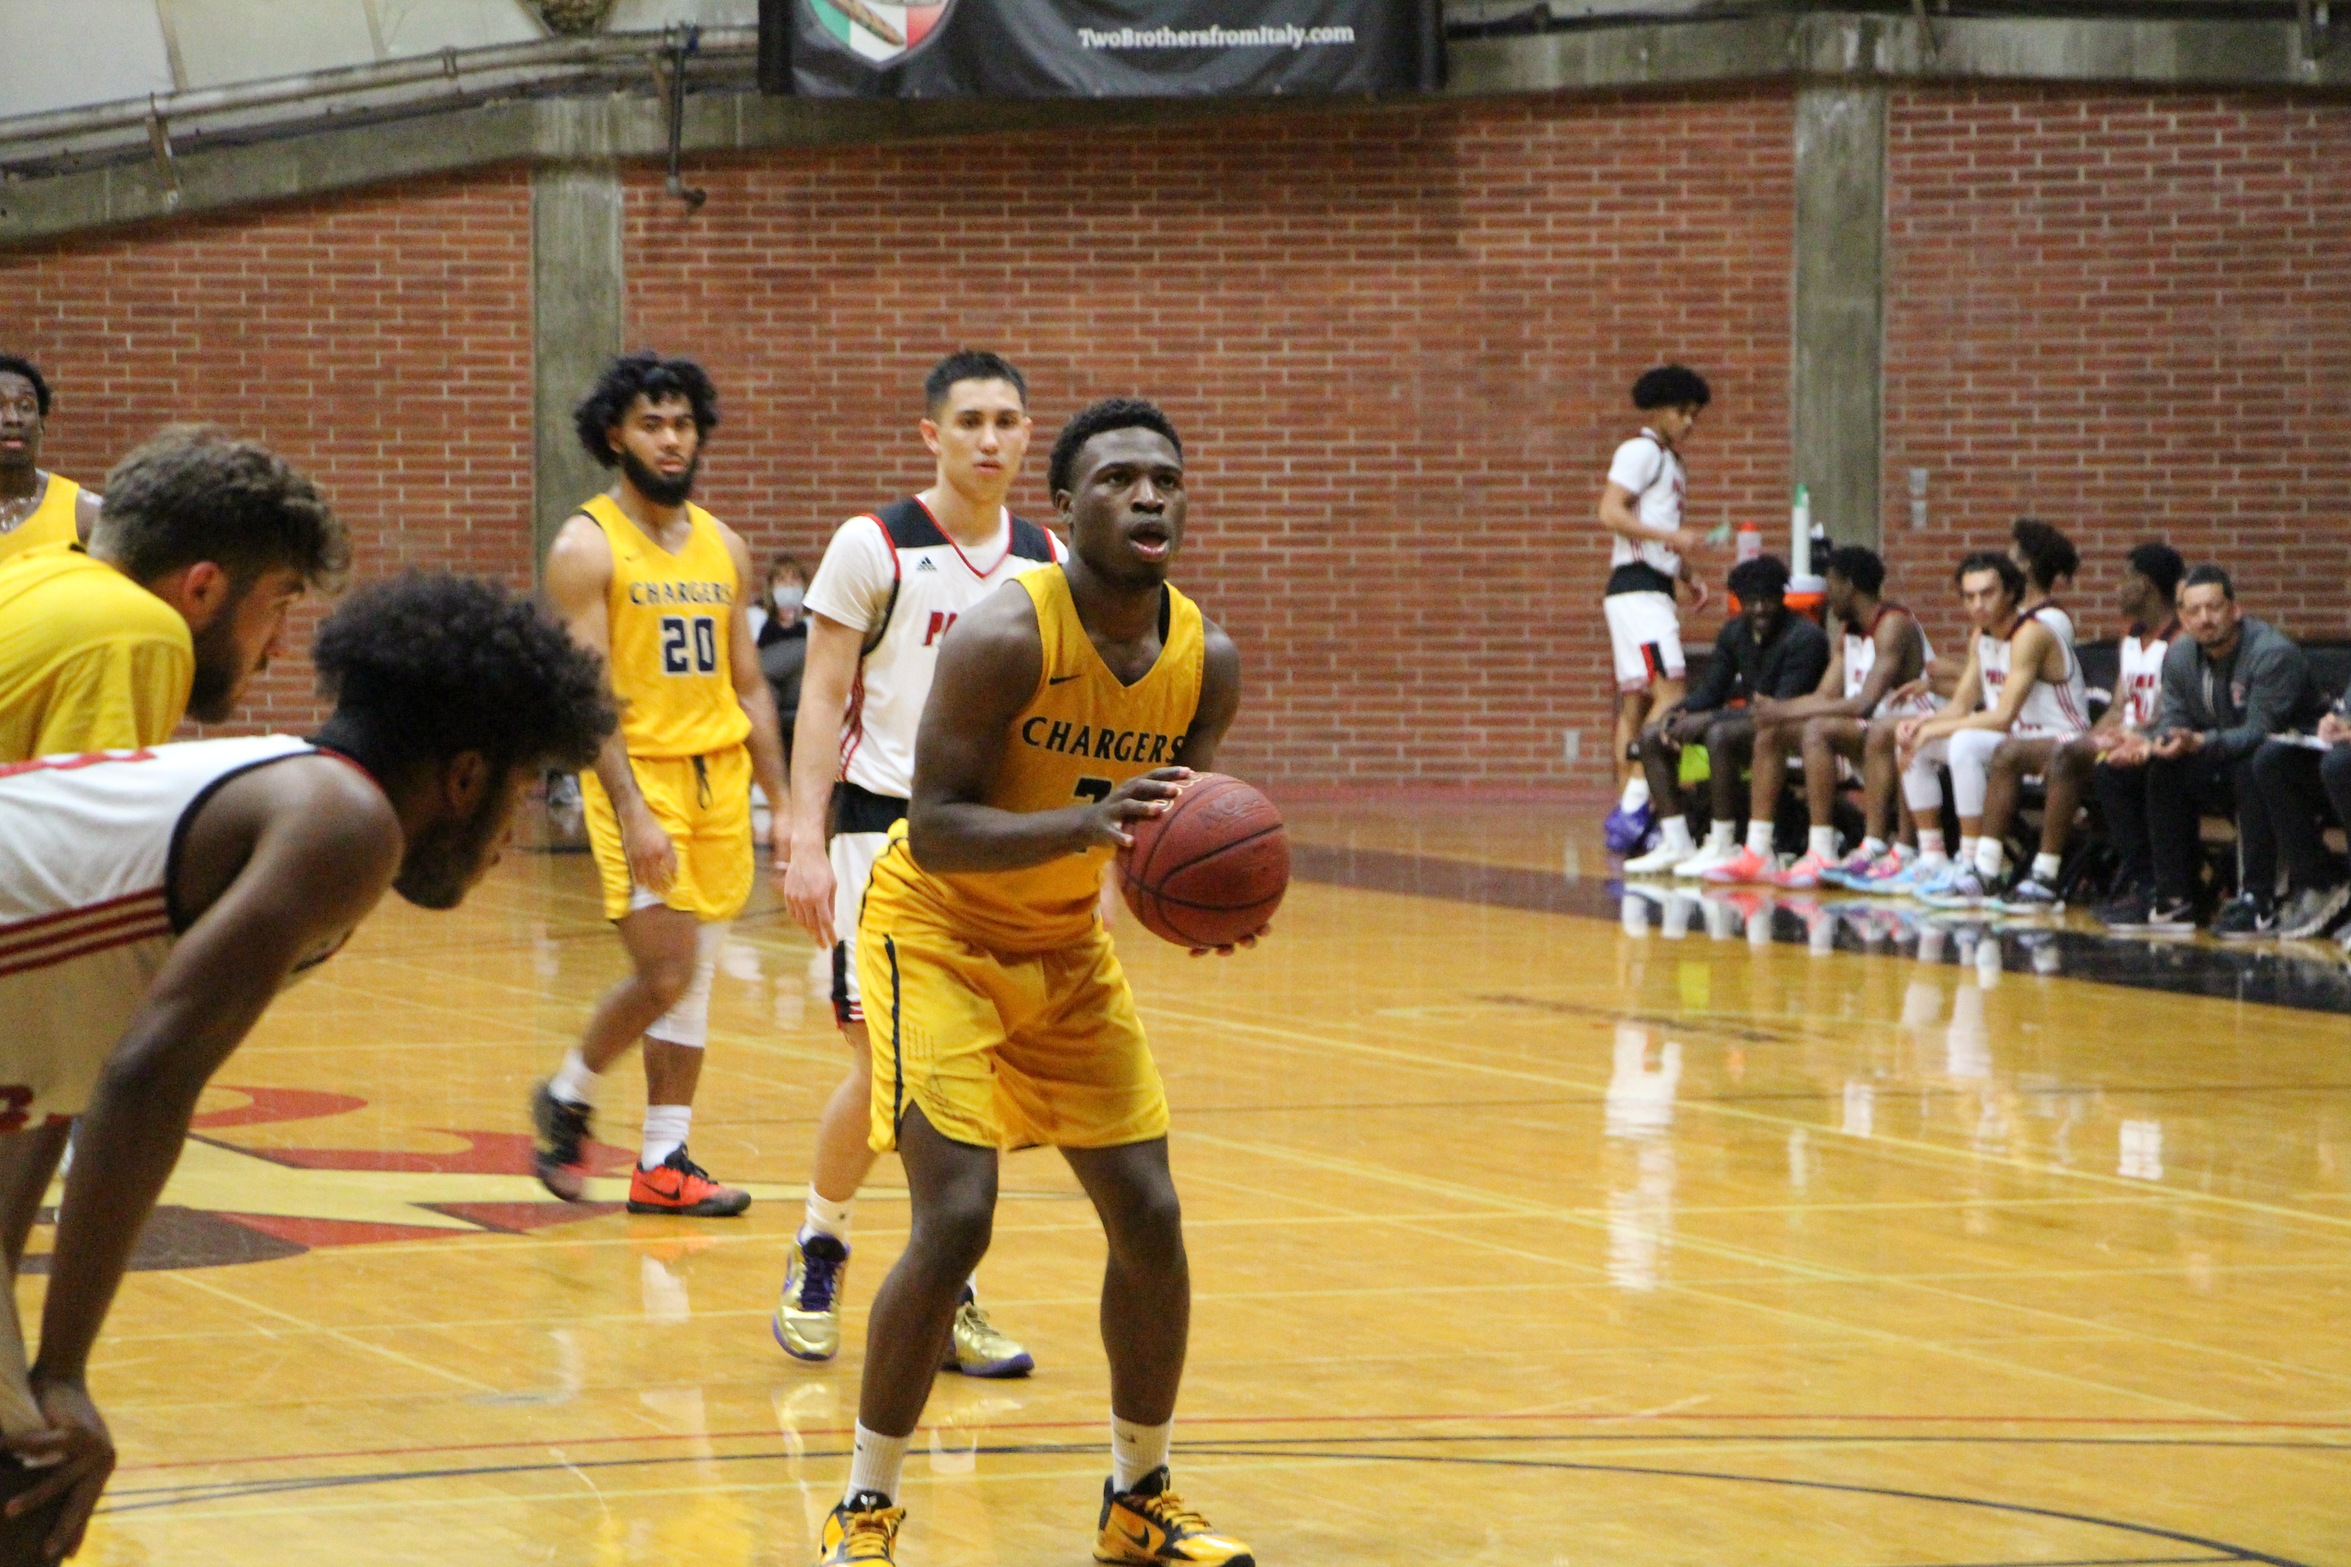 Cypress Knocks Off Palomar in OT, 69-63, in First Round of CCCAA Playoffs